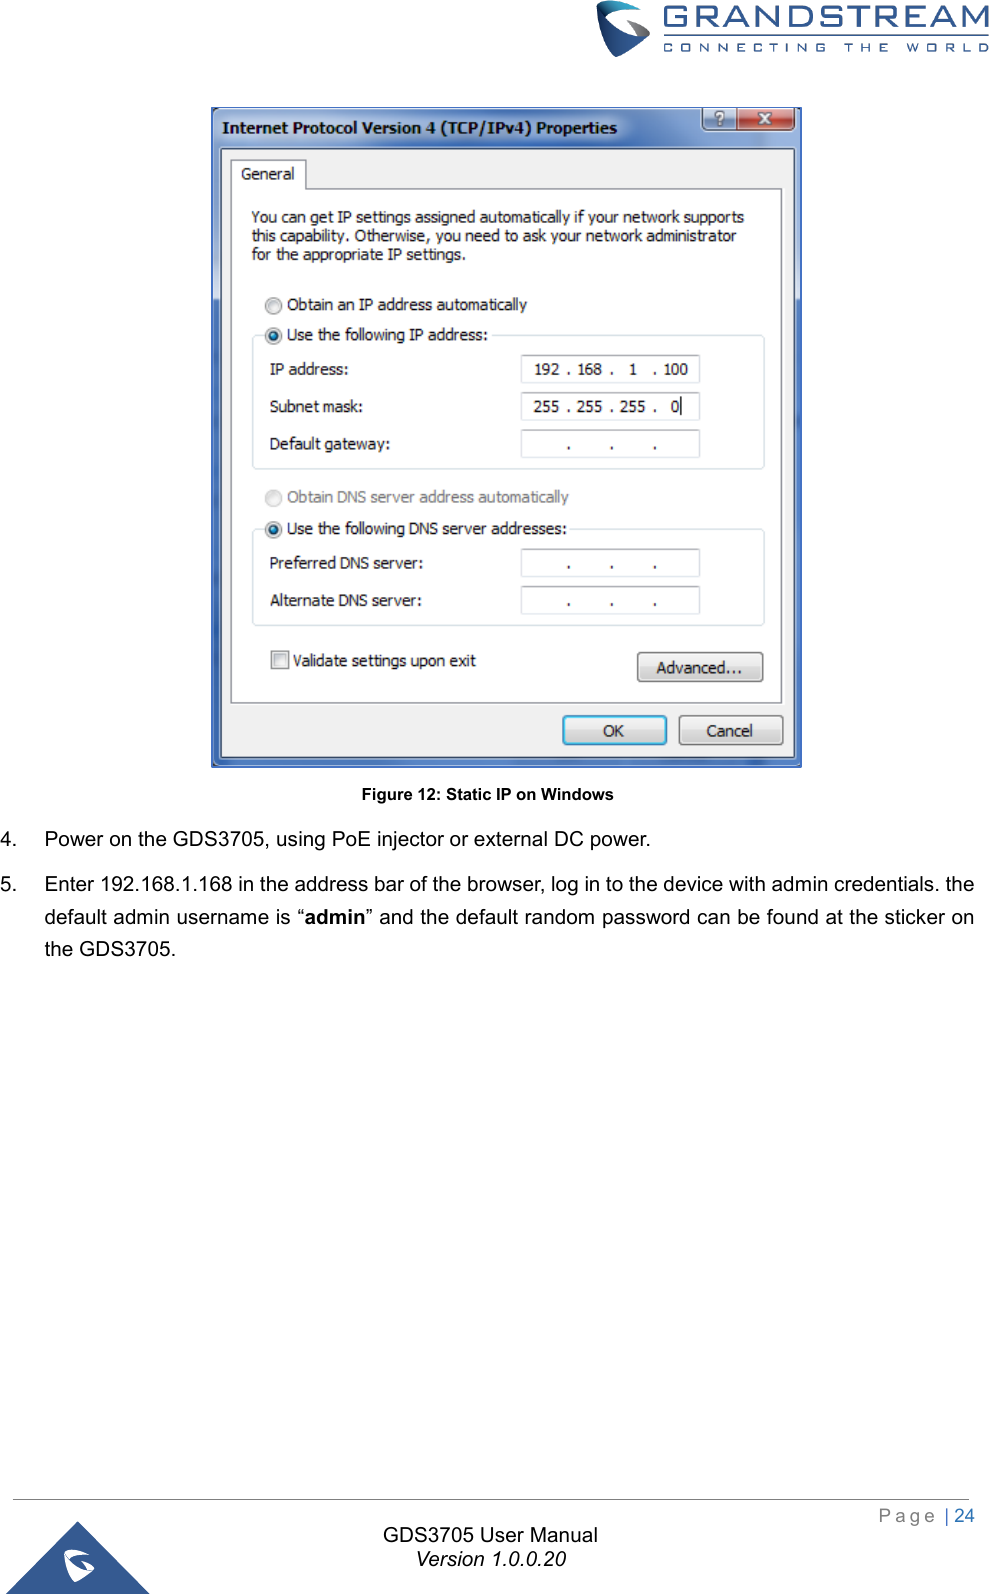                                                                         P a g e  | 24  GDS3705 User Manual Version 1.0.0.20  Figure 12: Static IP on Windows 4. Power on the GDS3705, using PoE injector or external DC power. 5. Enter 192.168.1.168 in the address bar of the browser, log in to the device with admin credentials. the default admin username is “admin” and the default random password can be found at the sticker on the GDS3705. 